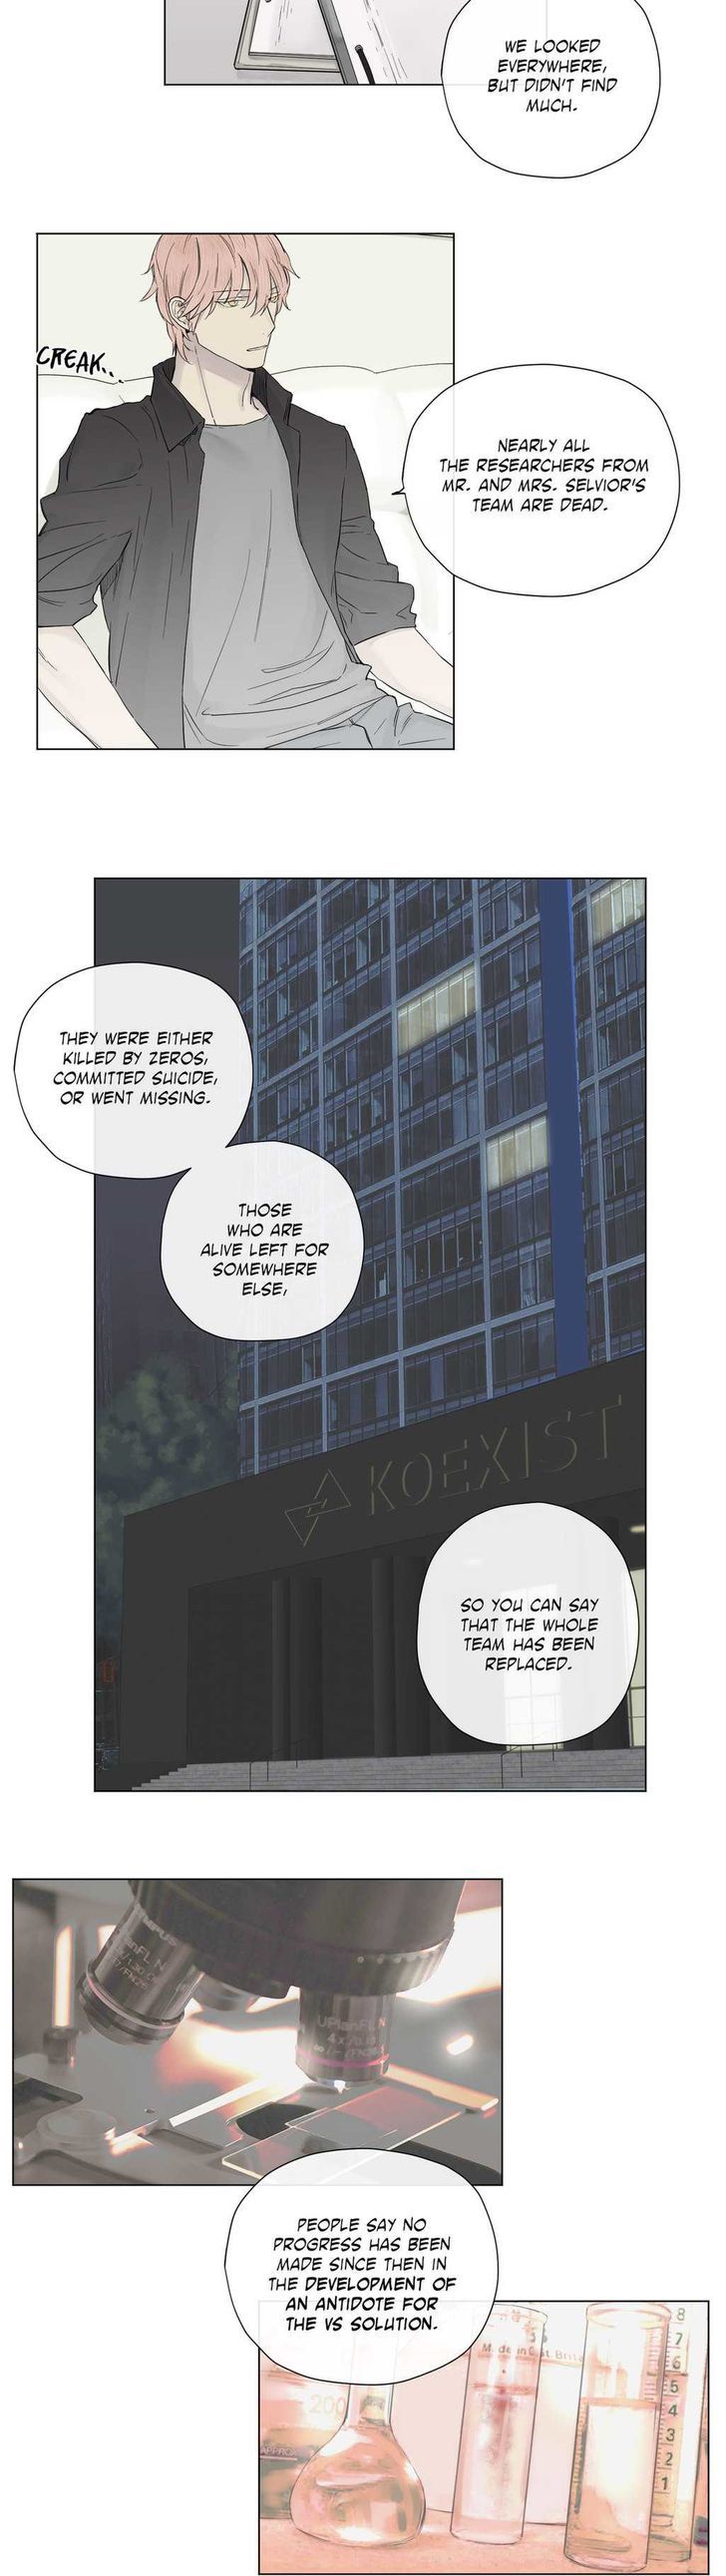 Royal Servant - Chapter 11 Page 18